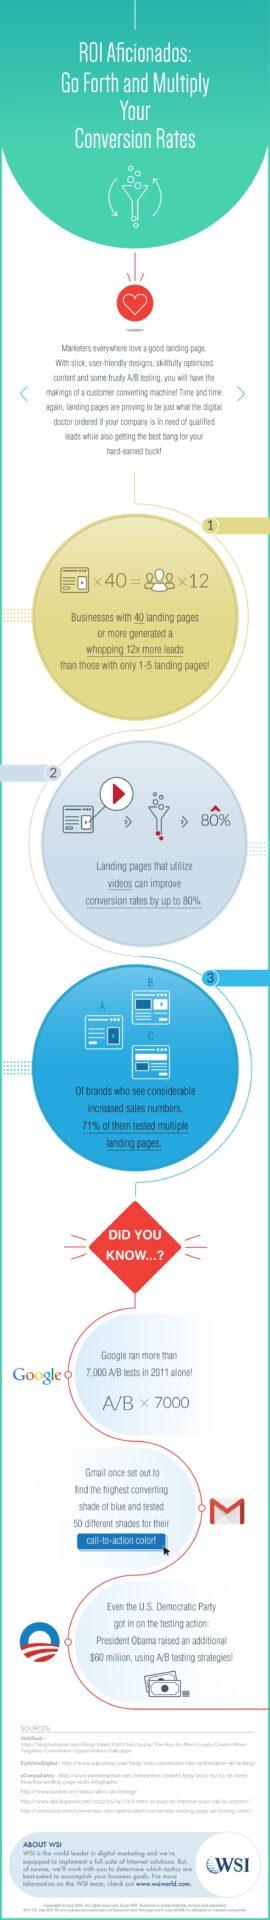 Conversion Rates Infographic